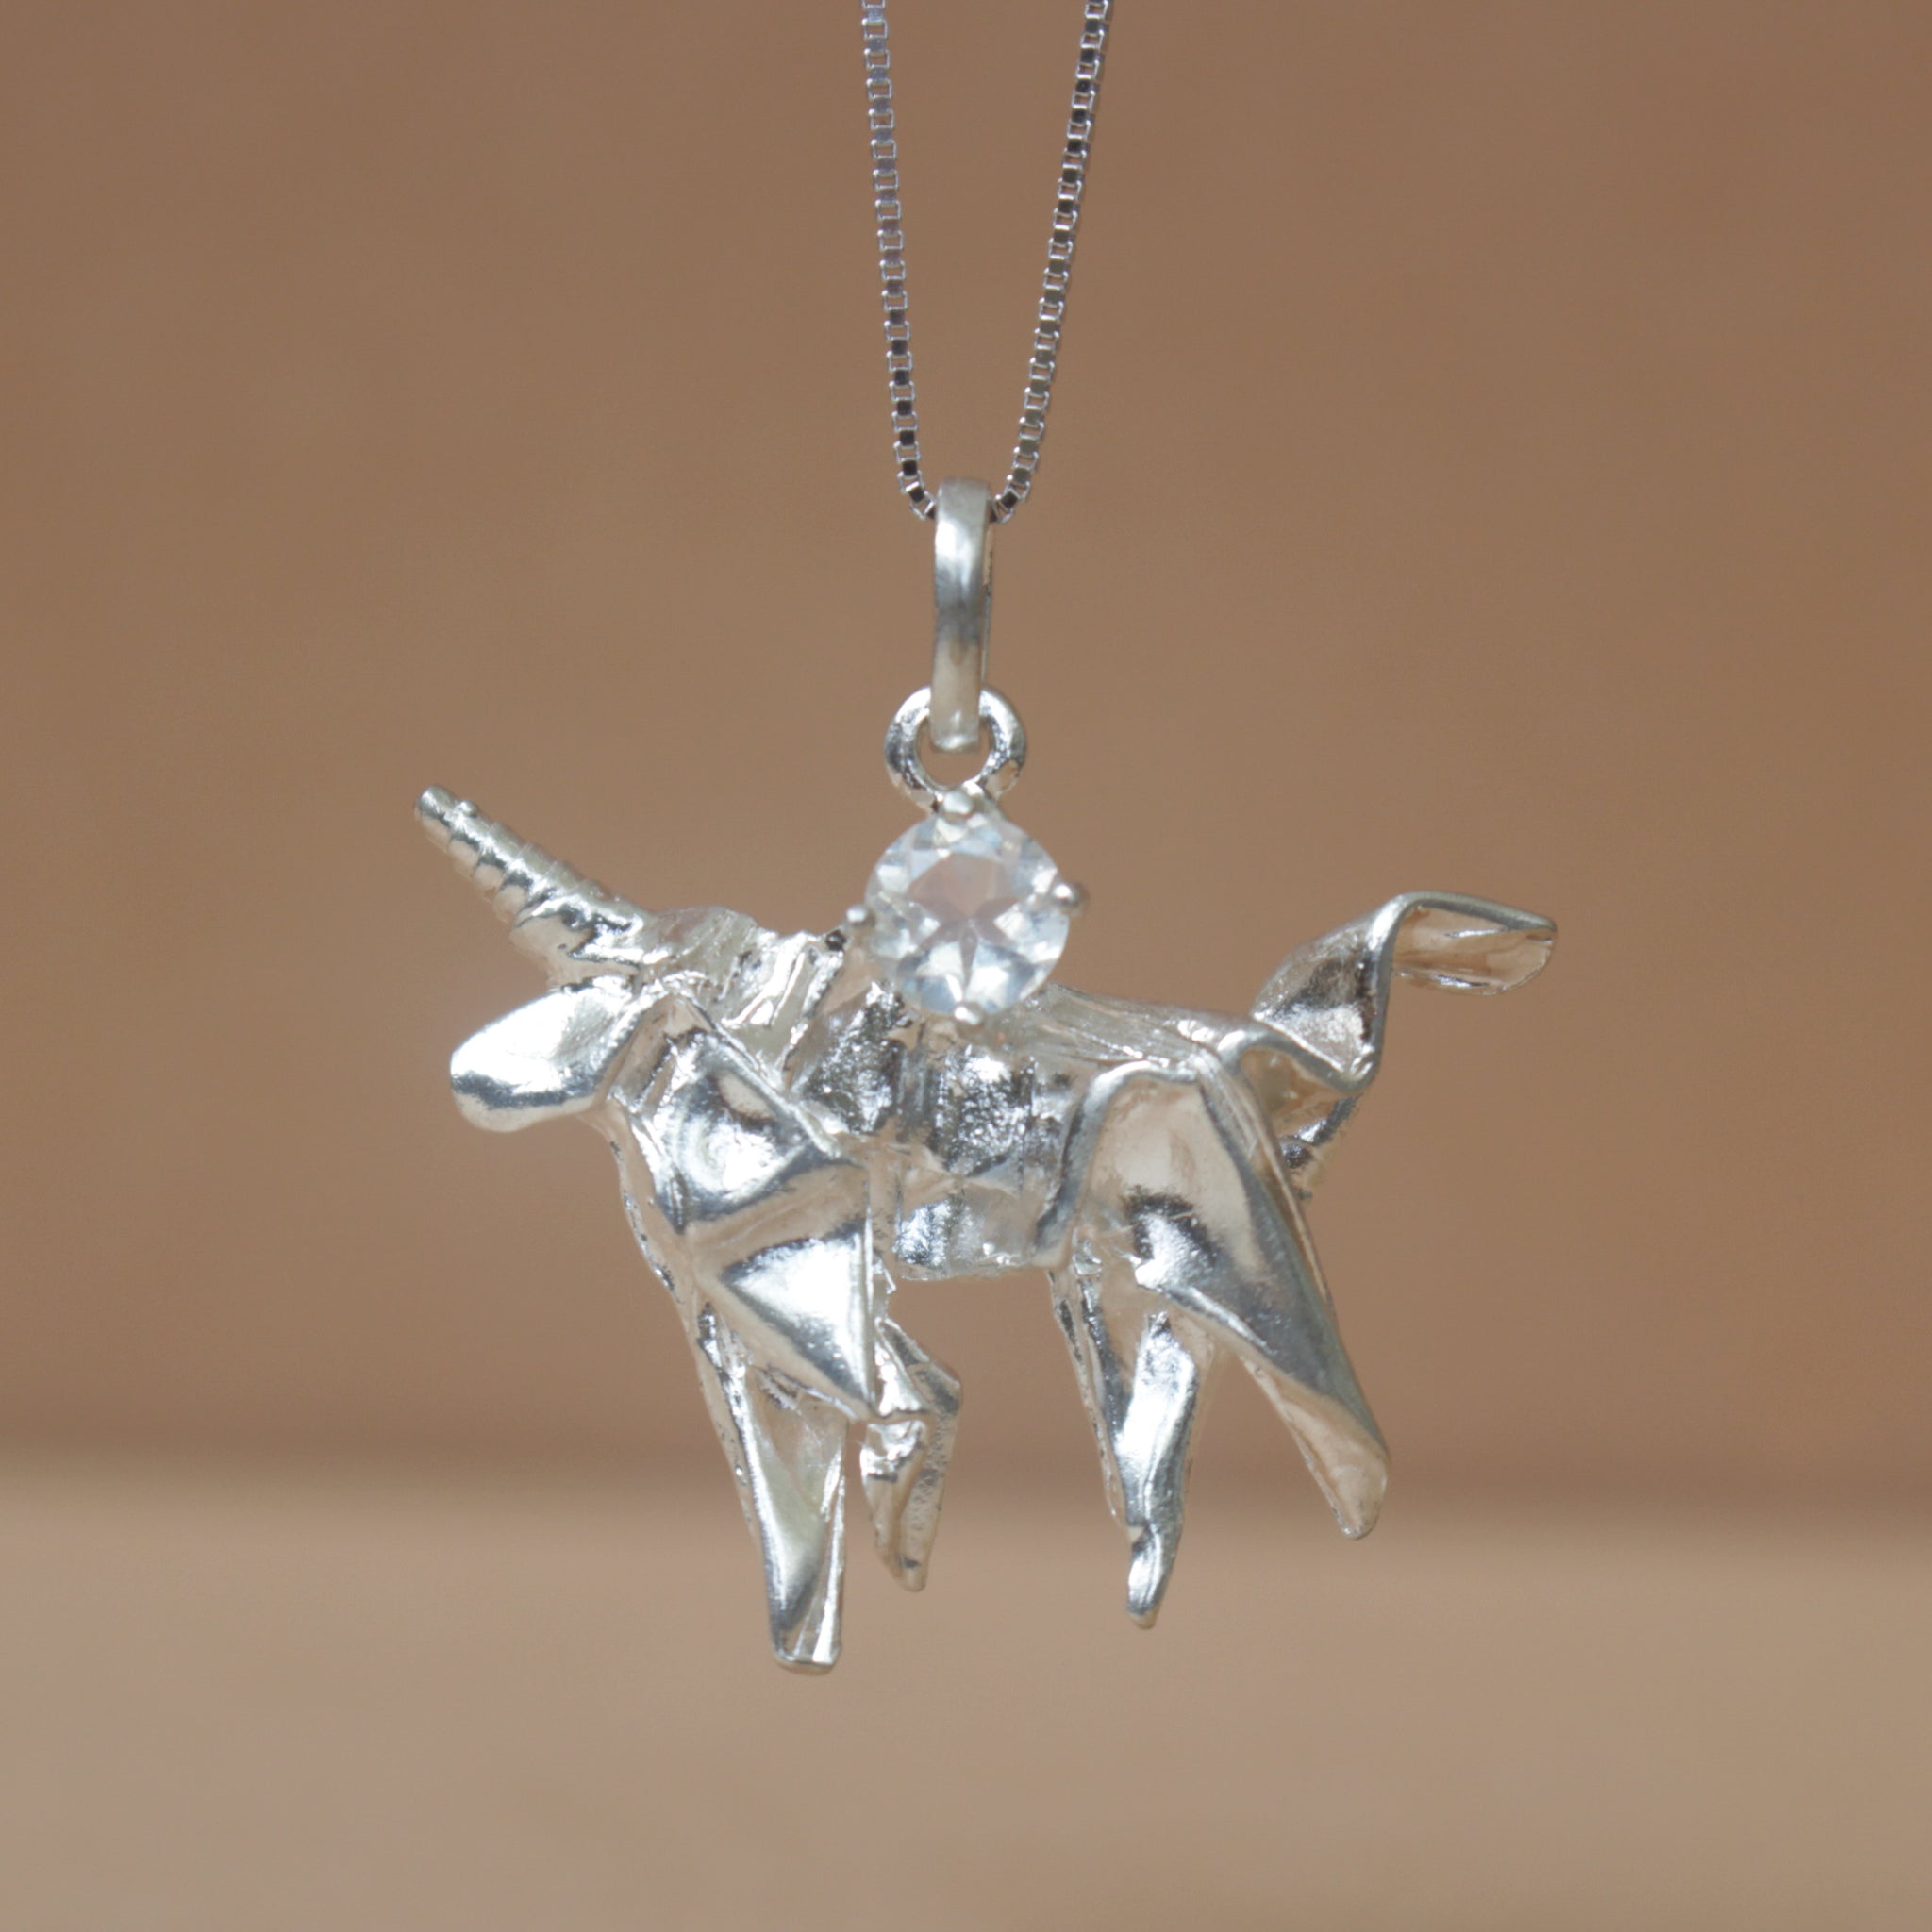 Silver Origami Unicorn Merry-go-round Necklace with Moonstone